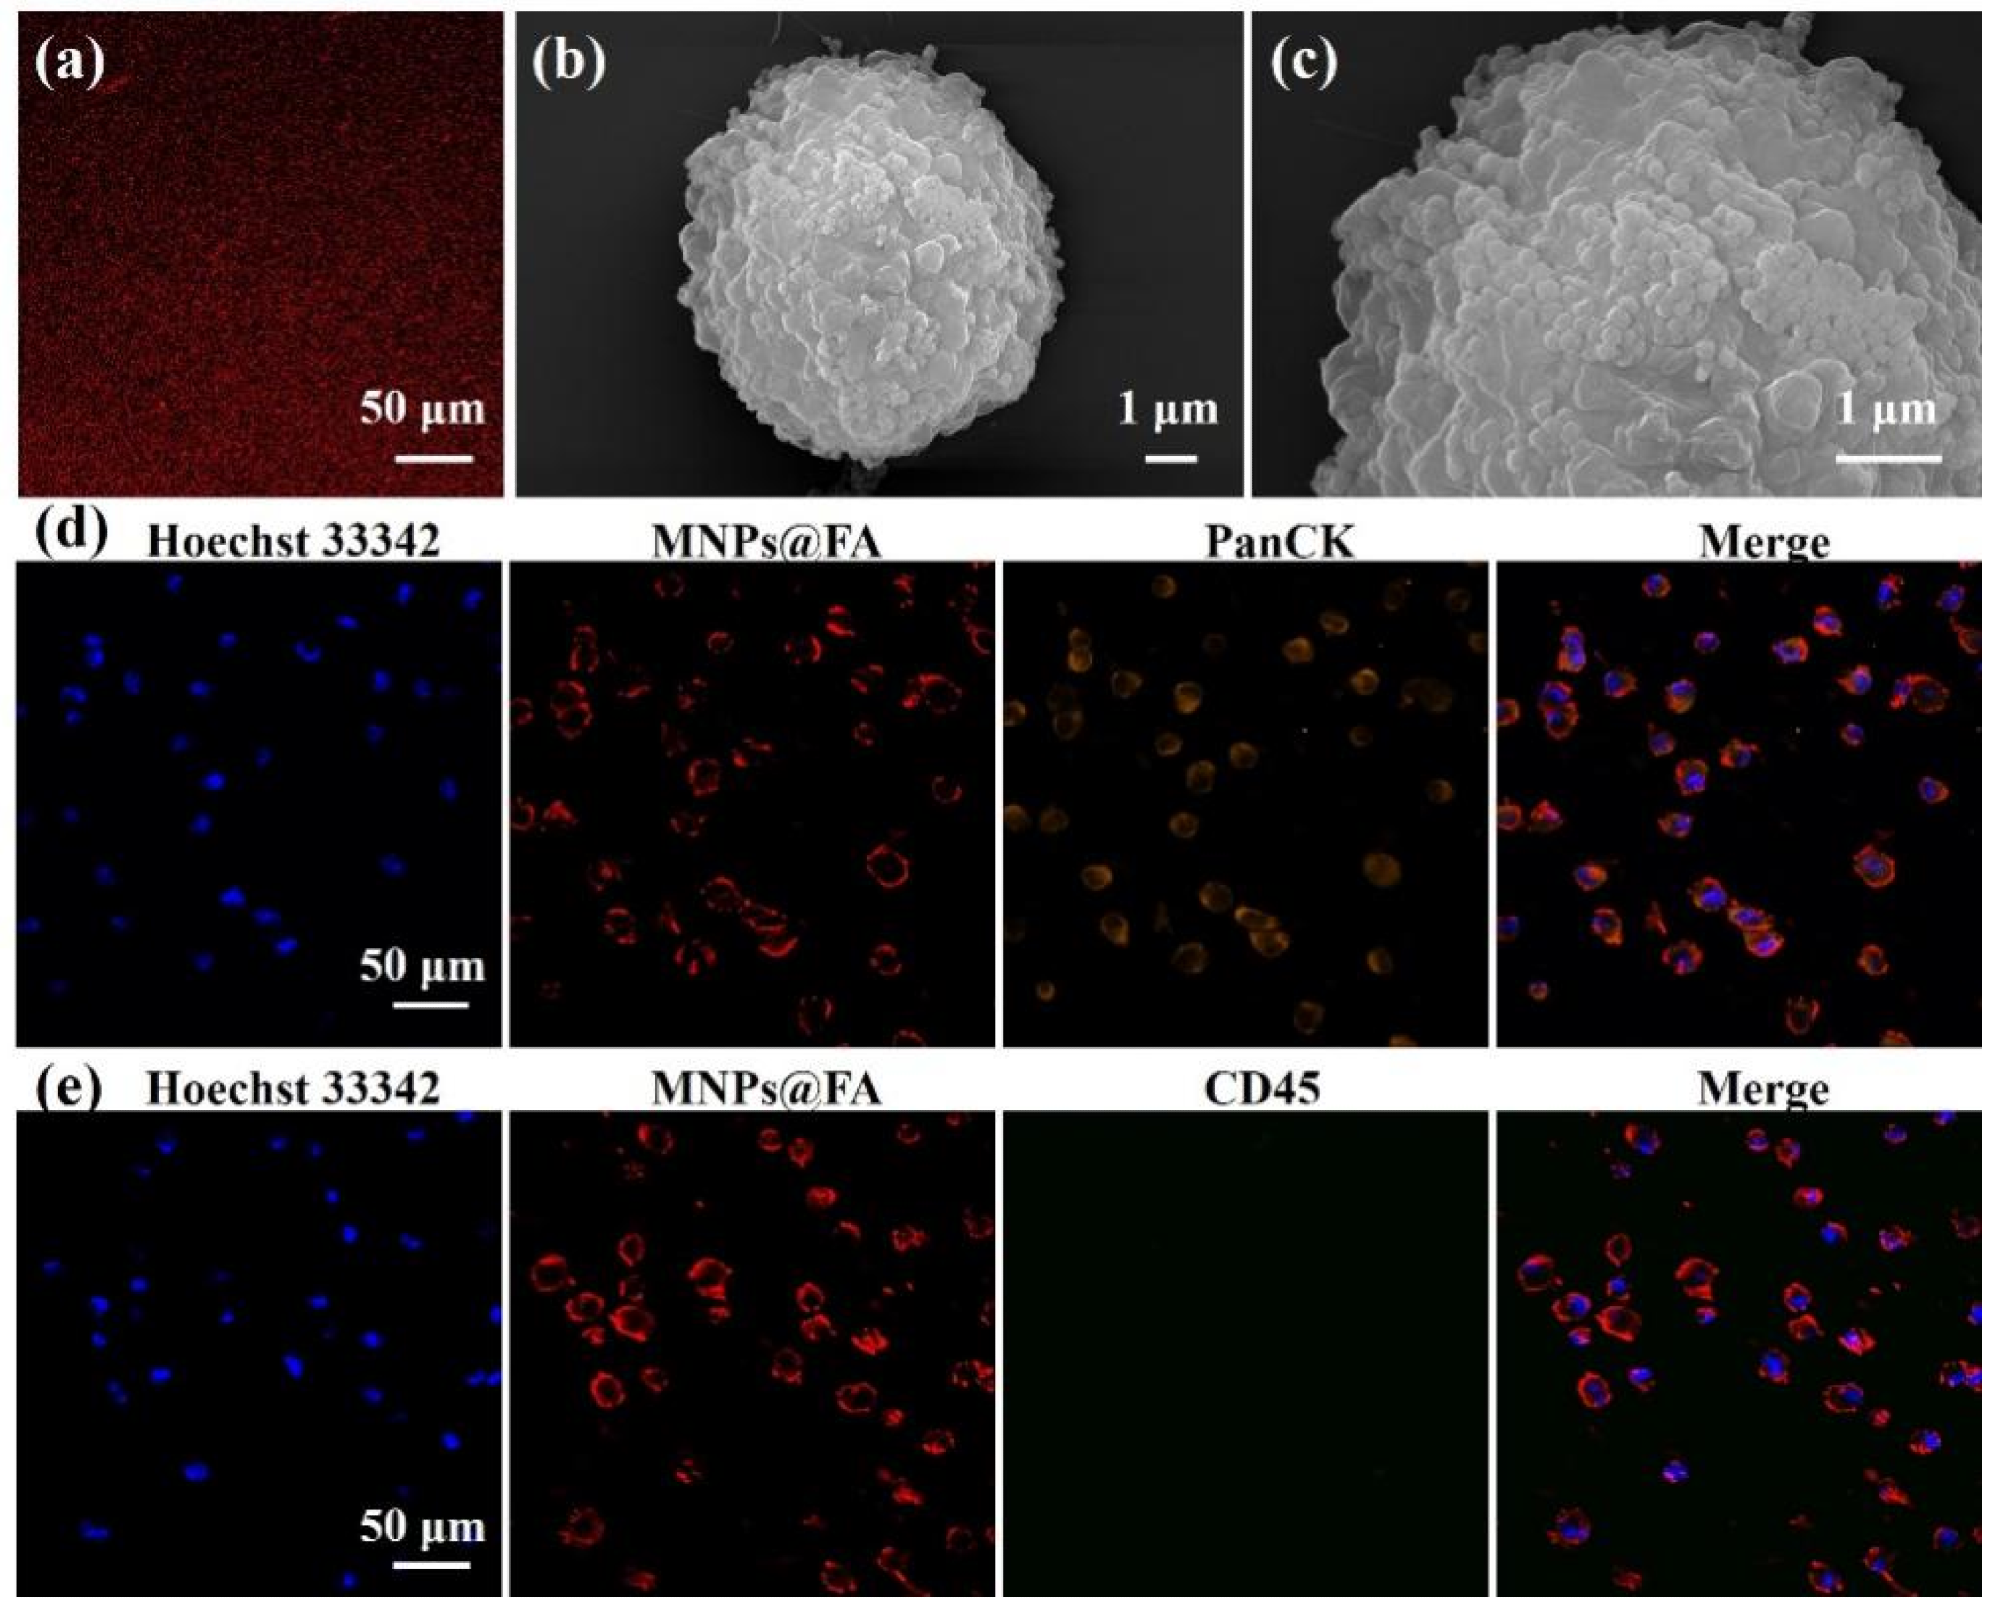 A fluorescent image of MNPs@FA showing a stable fluorescent signal. (b,c) SEM images of an SK-OV-3 cell captured by MNPs@FA with a sufficient number of nanoparticles on the cell surface. (d) Fluorescent images of SK-OV-3 cells captured by MNPs@FA (red) with immunostaining of anti-PanCK-555 (orange) and Hoechst 33,342 (blue). (e) Fluorescent images of SK-OV-3 cells captured by MNPs@FA (red) with immunostaining of anti-CD45-488 (green) and Hoechst 33,342 (blue).